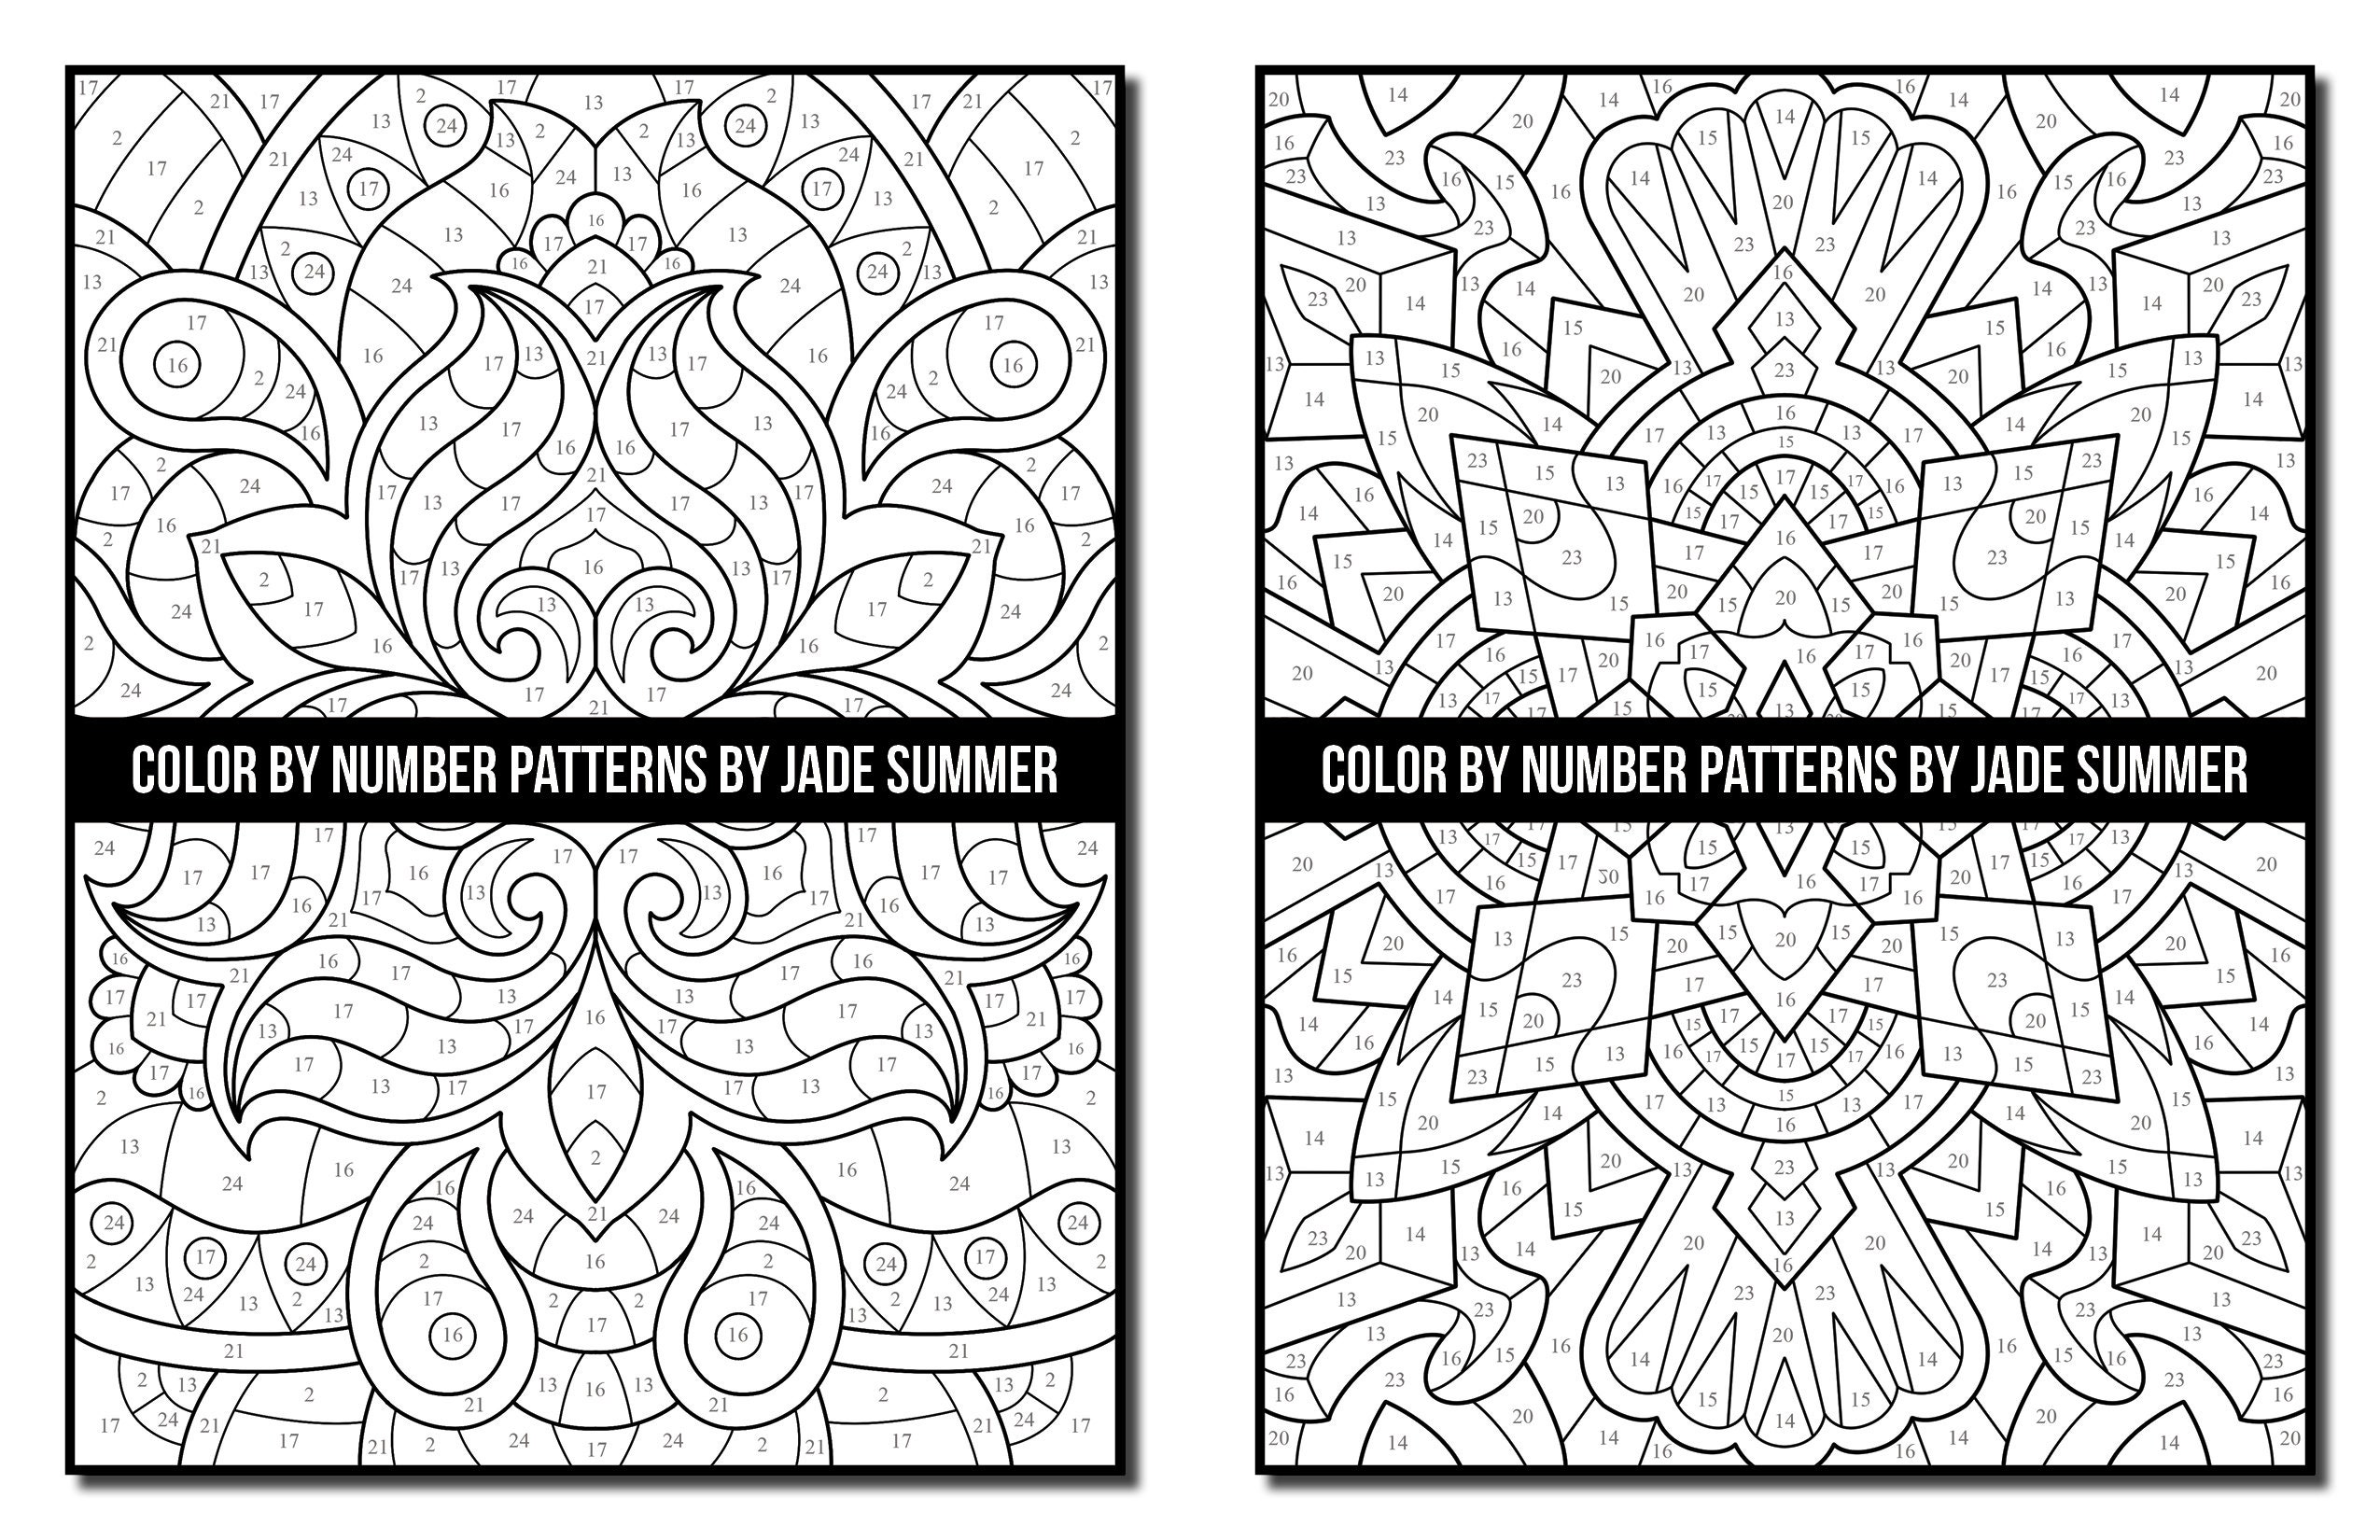 Color by Number Patterns: An Adult Coloring Book with Fun, Easy, and Relaxing Coloring Pages by Jade Summer